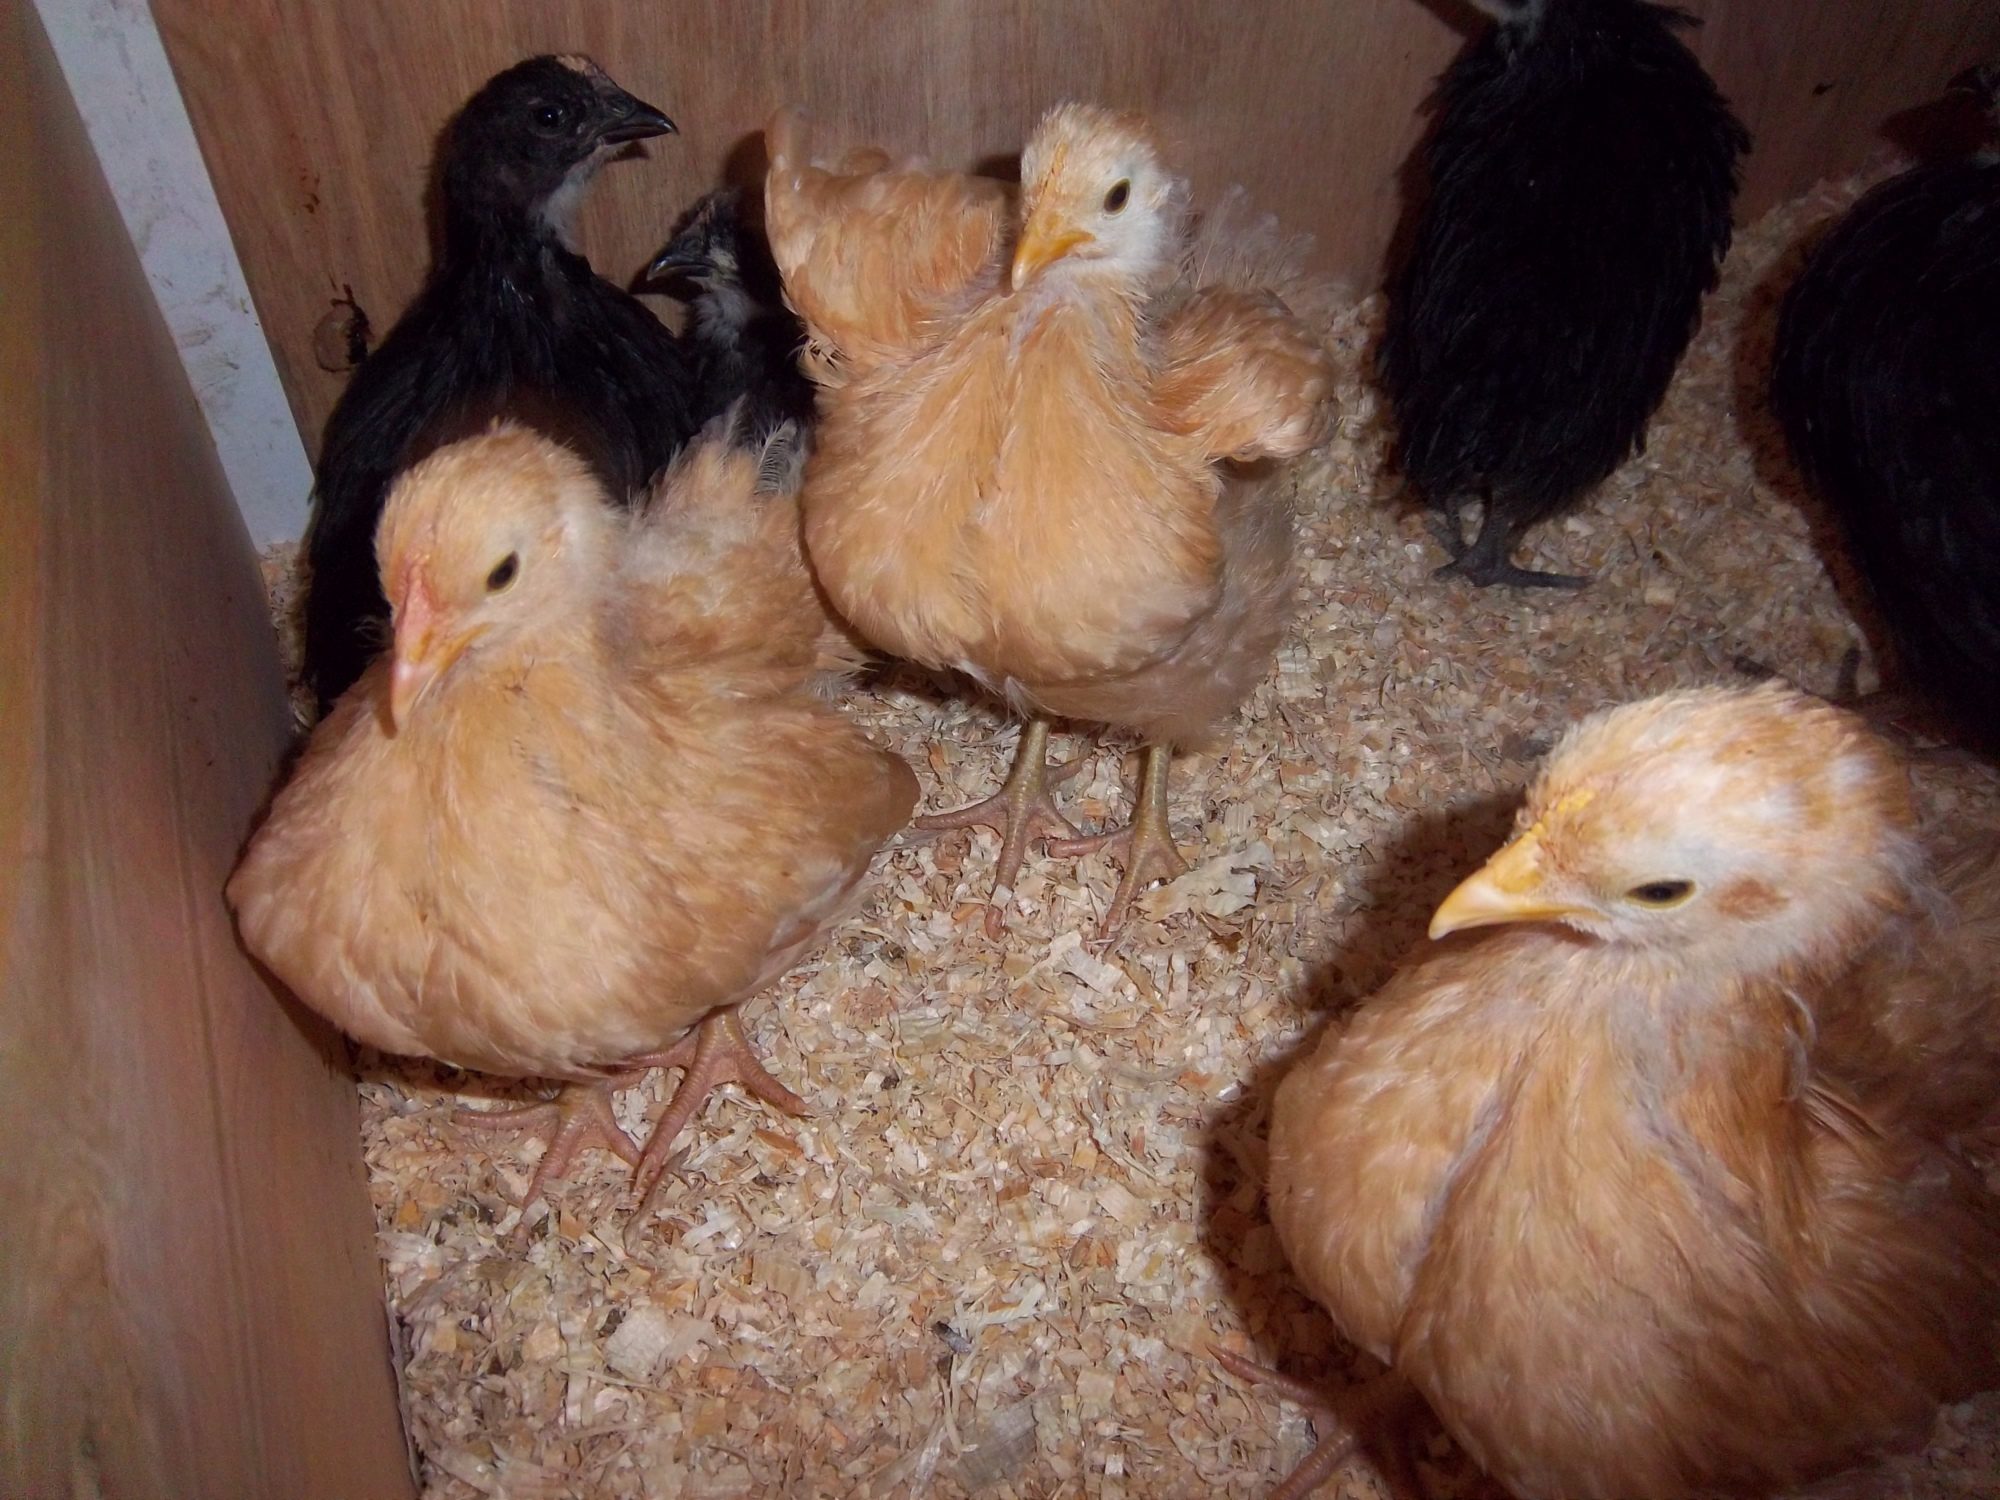 Three of the four BO Pullets. For now, my son has named them all "Peep".